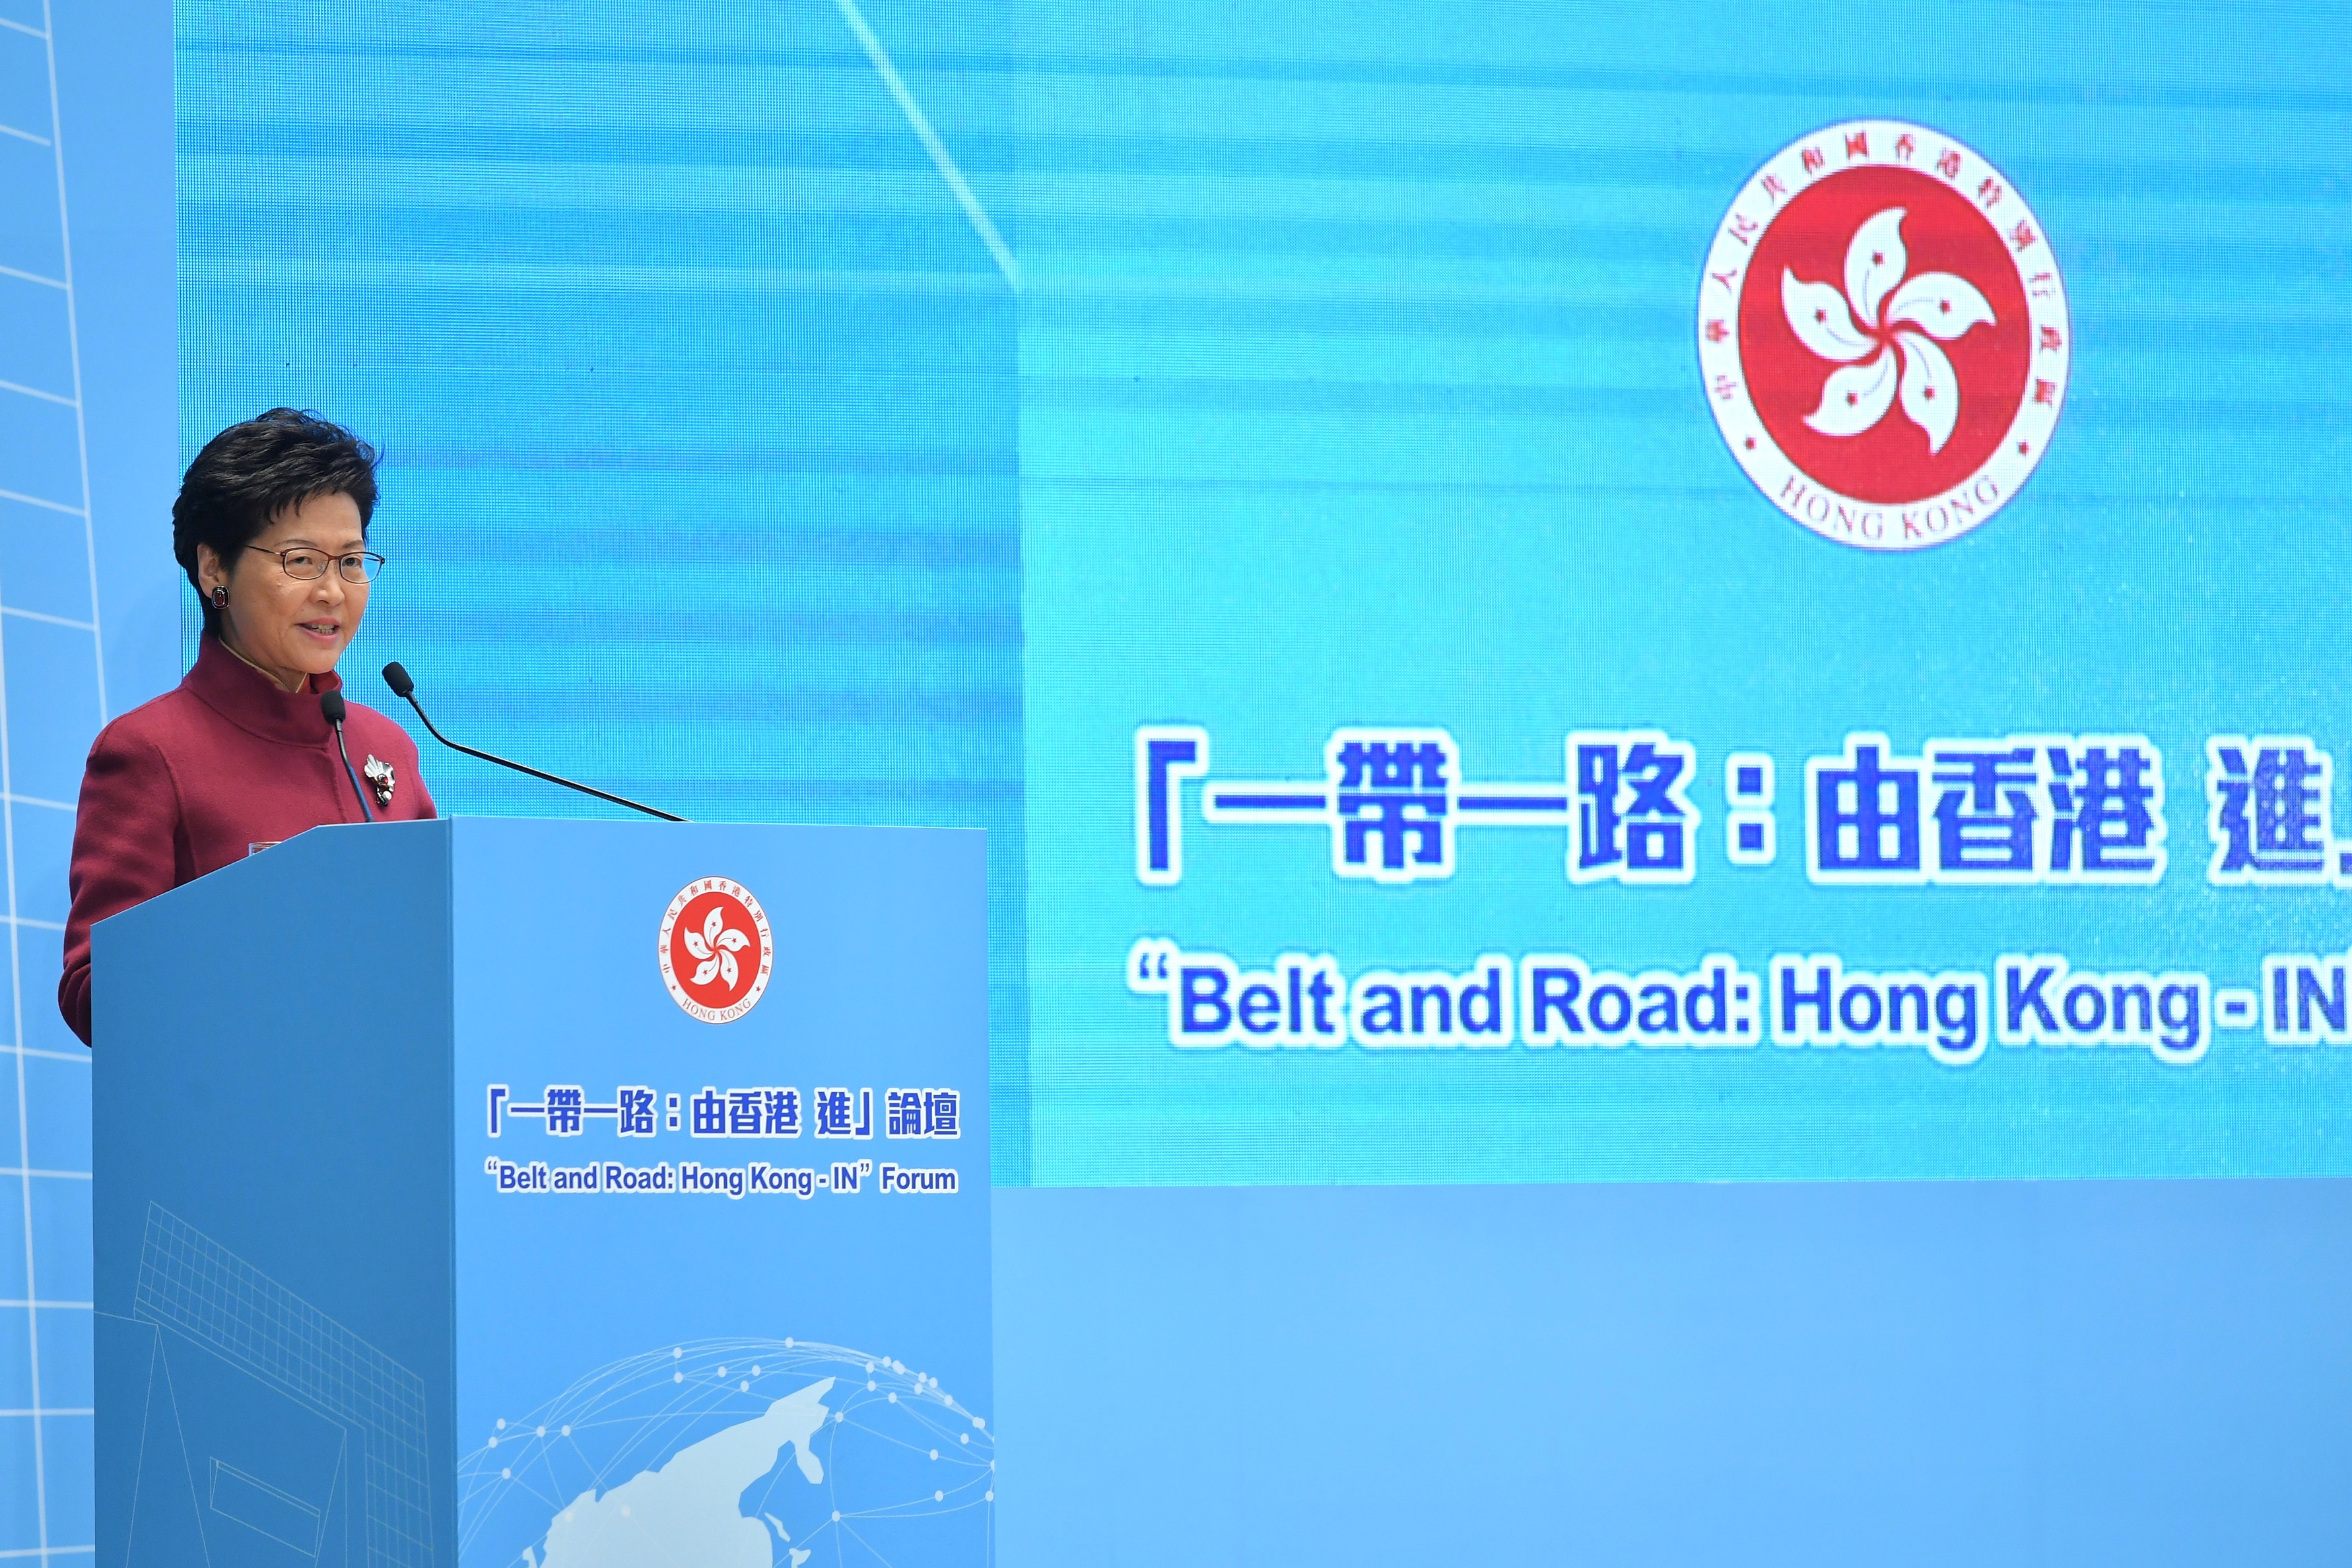 The Chief Executive, Mrs Carrie Lam, delivered opening remarks at the Forum.